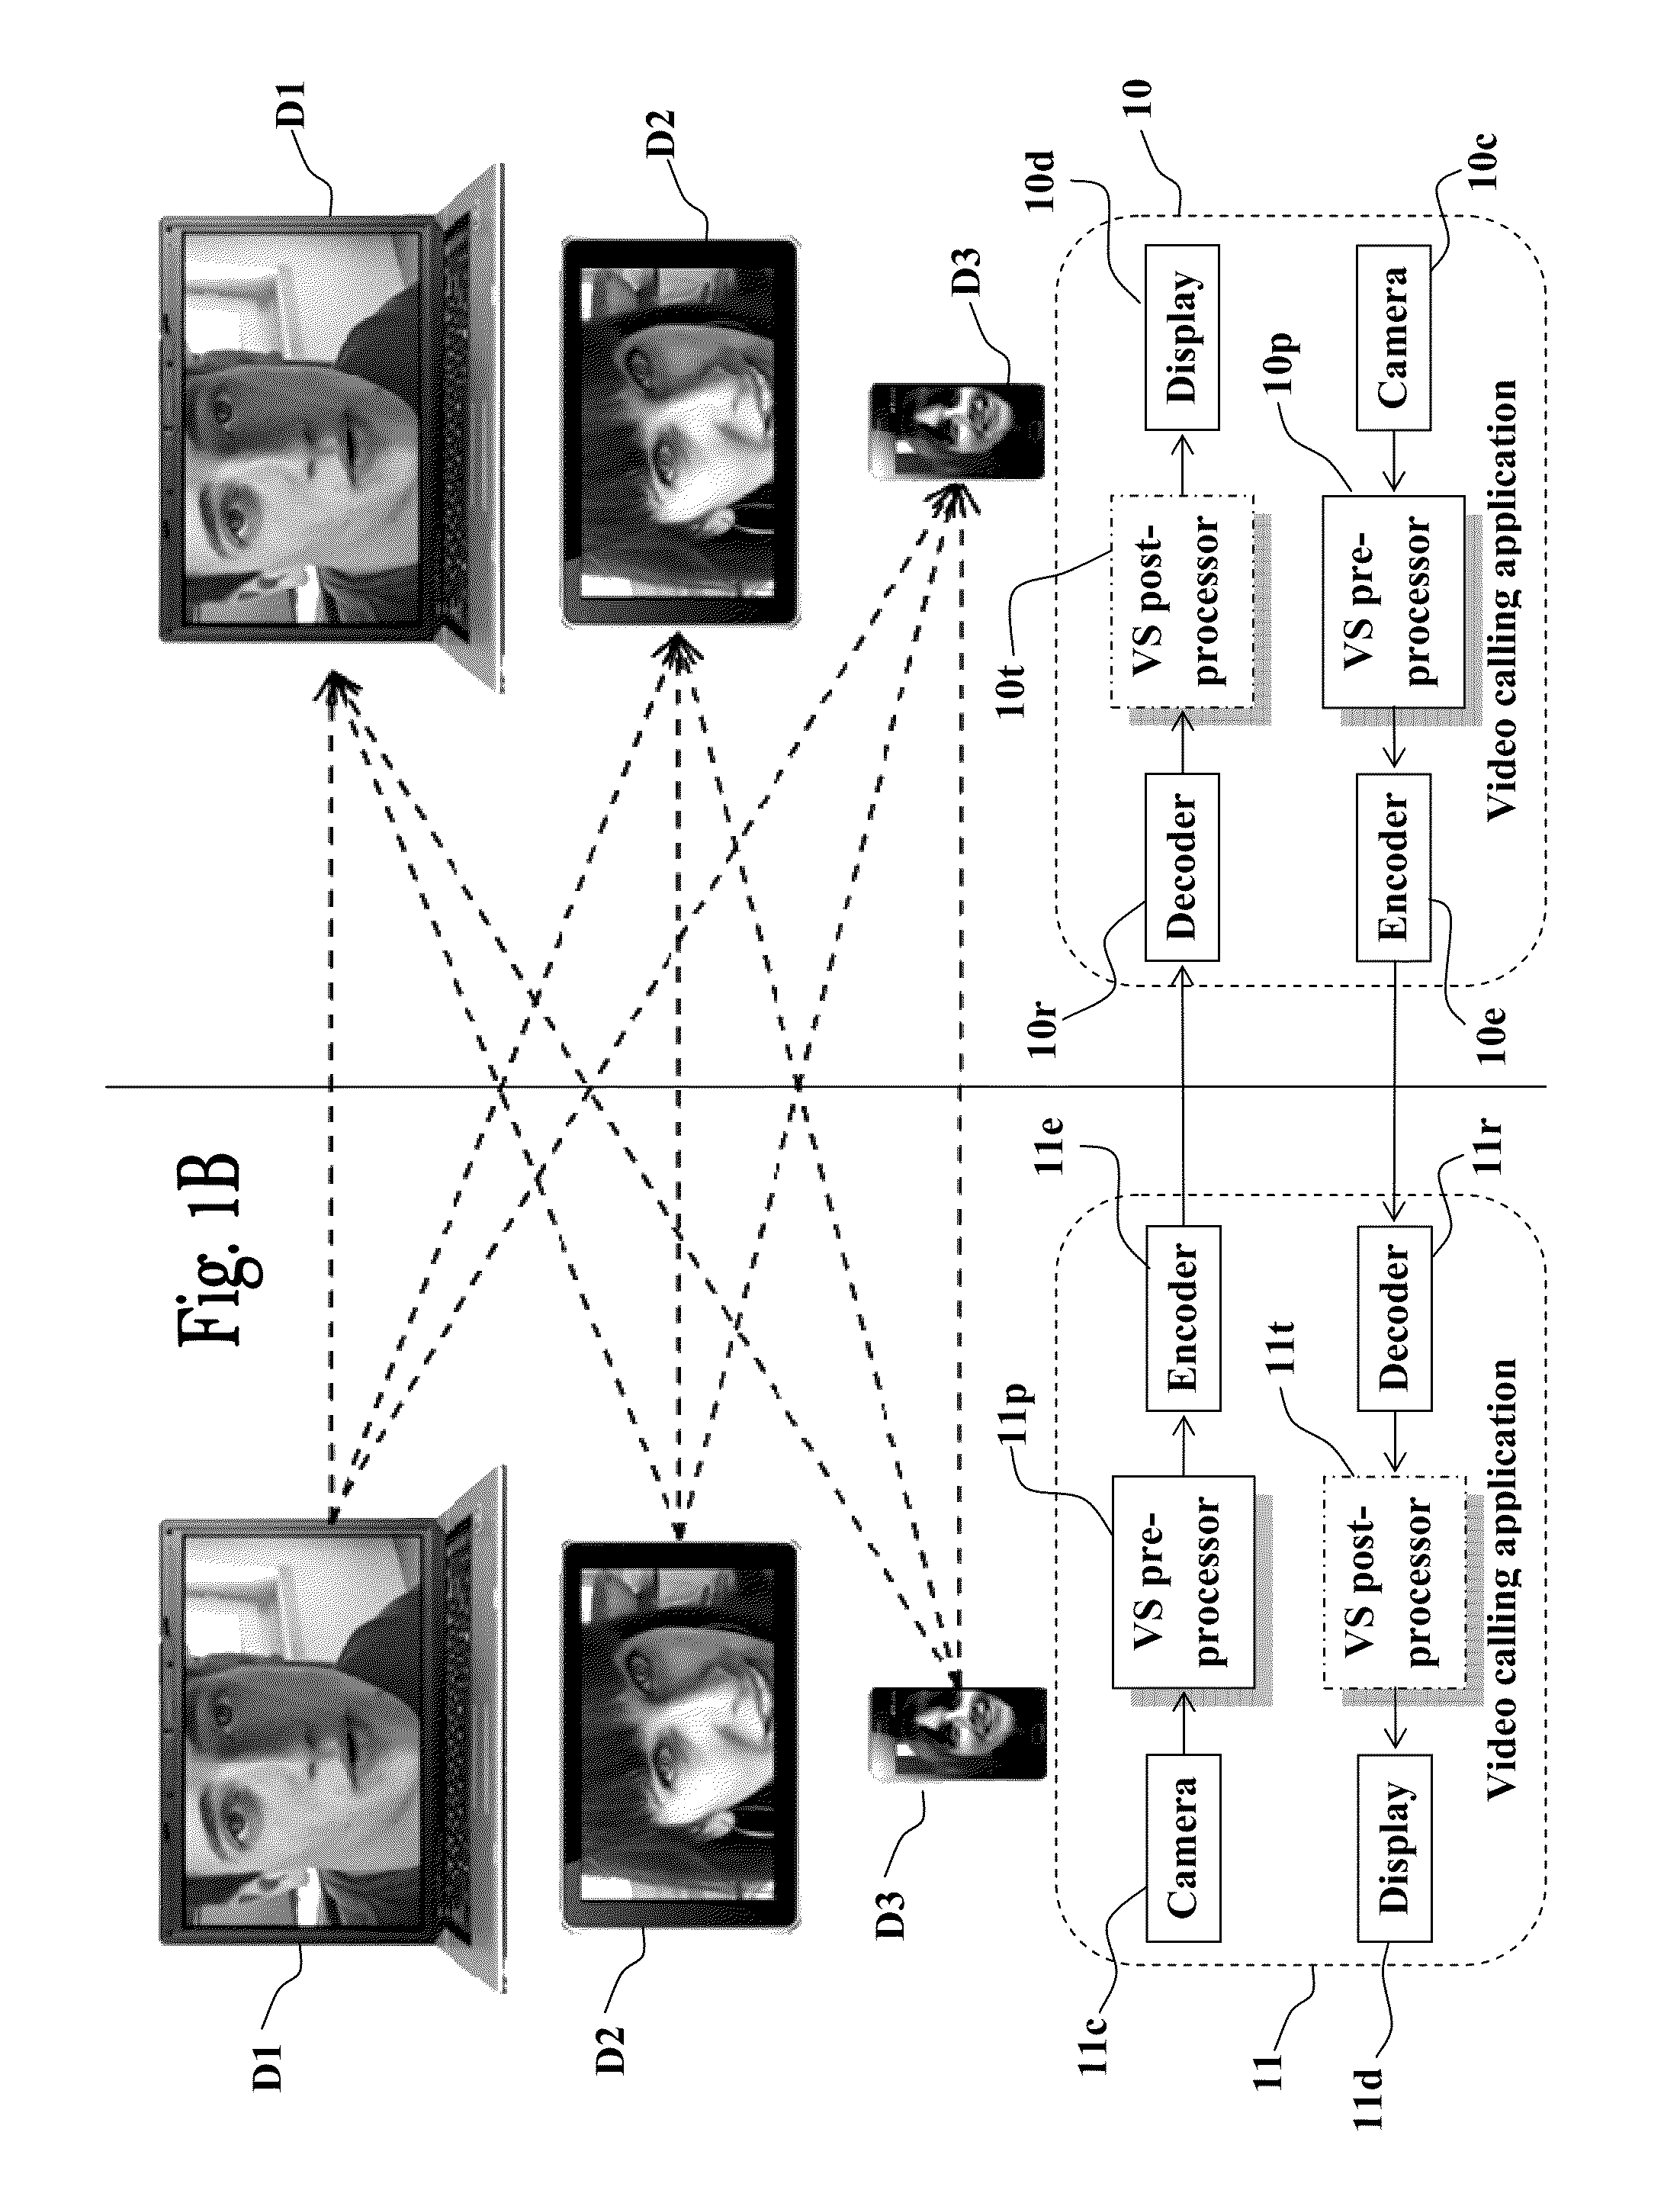 System and method for online processing of video images in real time